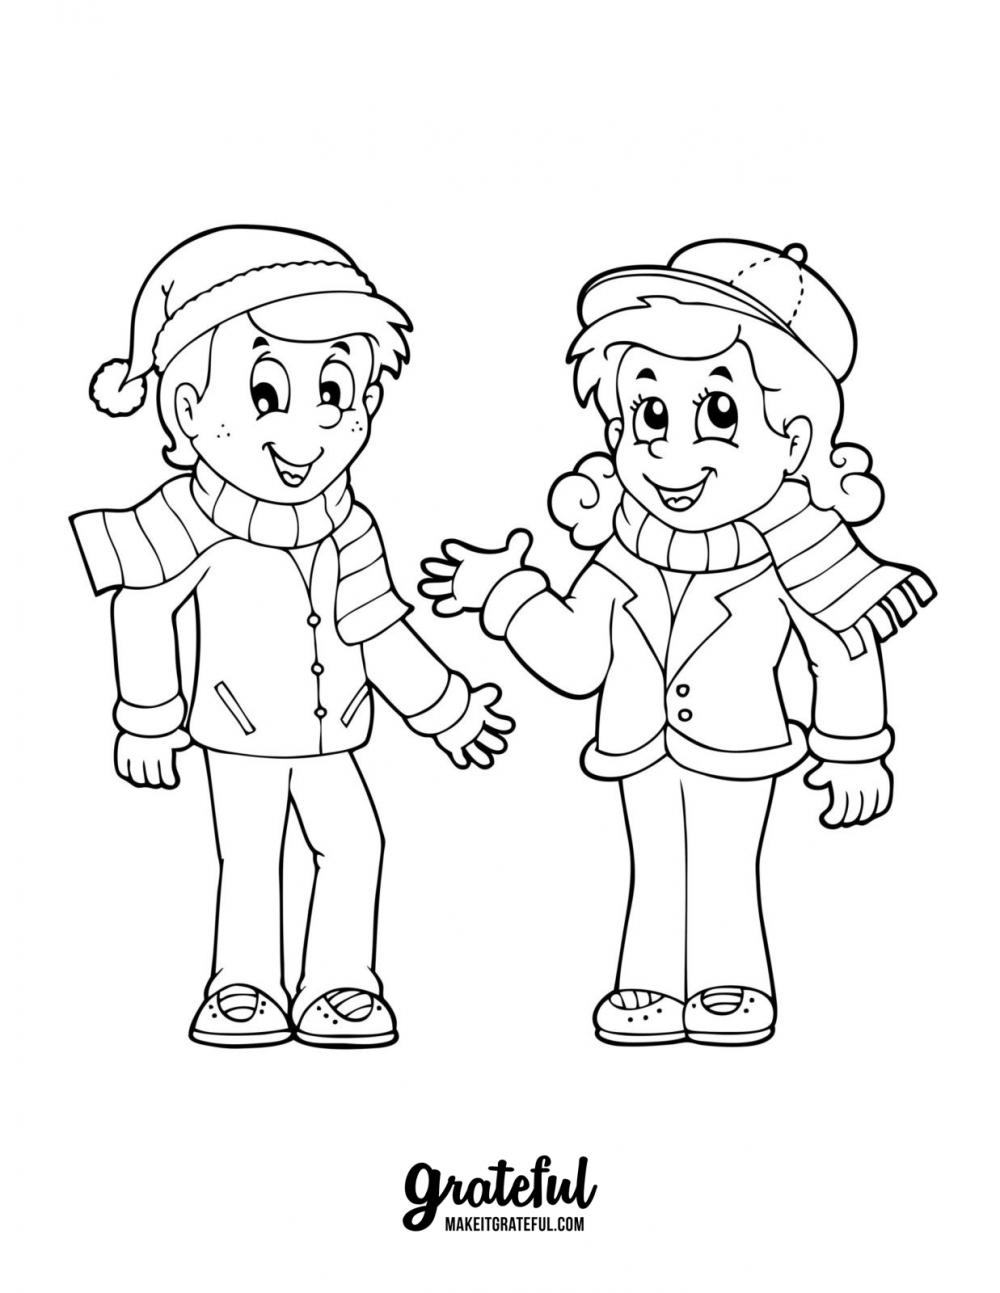 Cozy couple with scarves - Holiday coloring pages